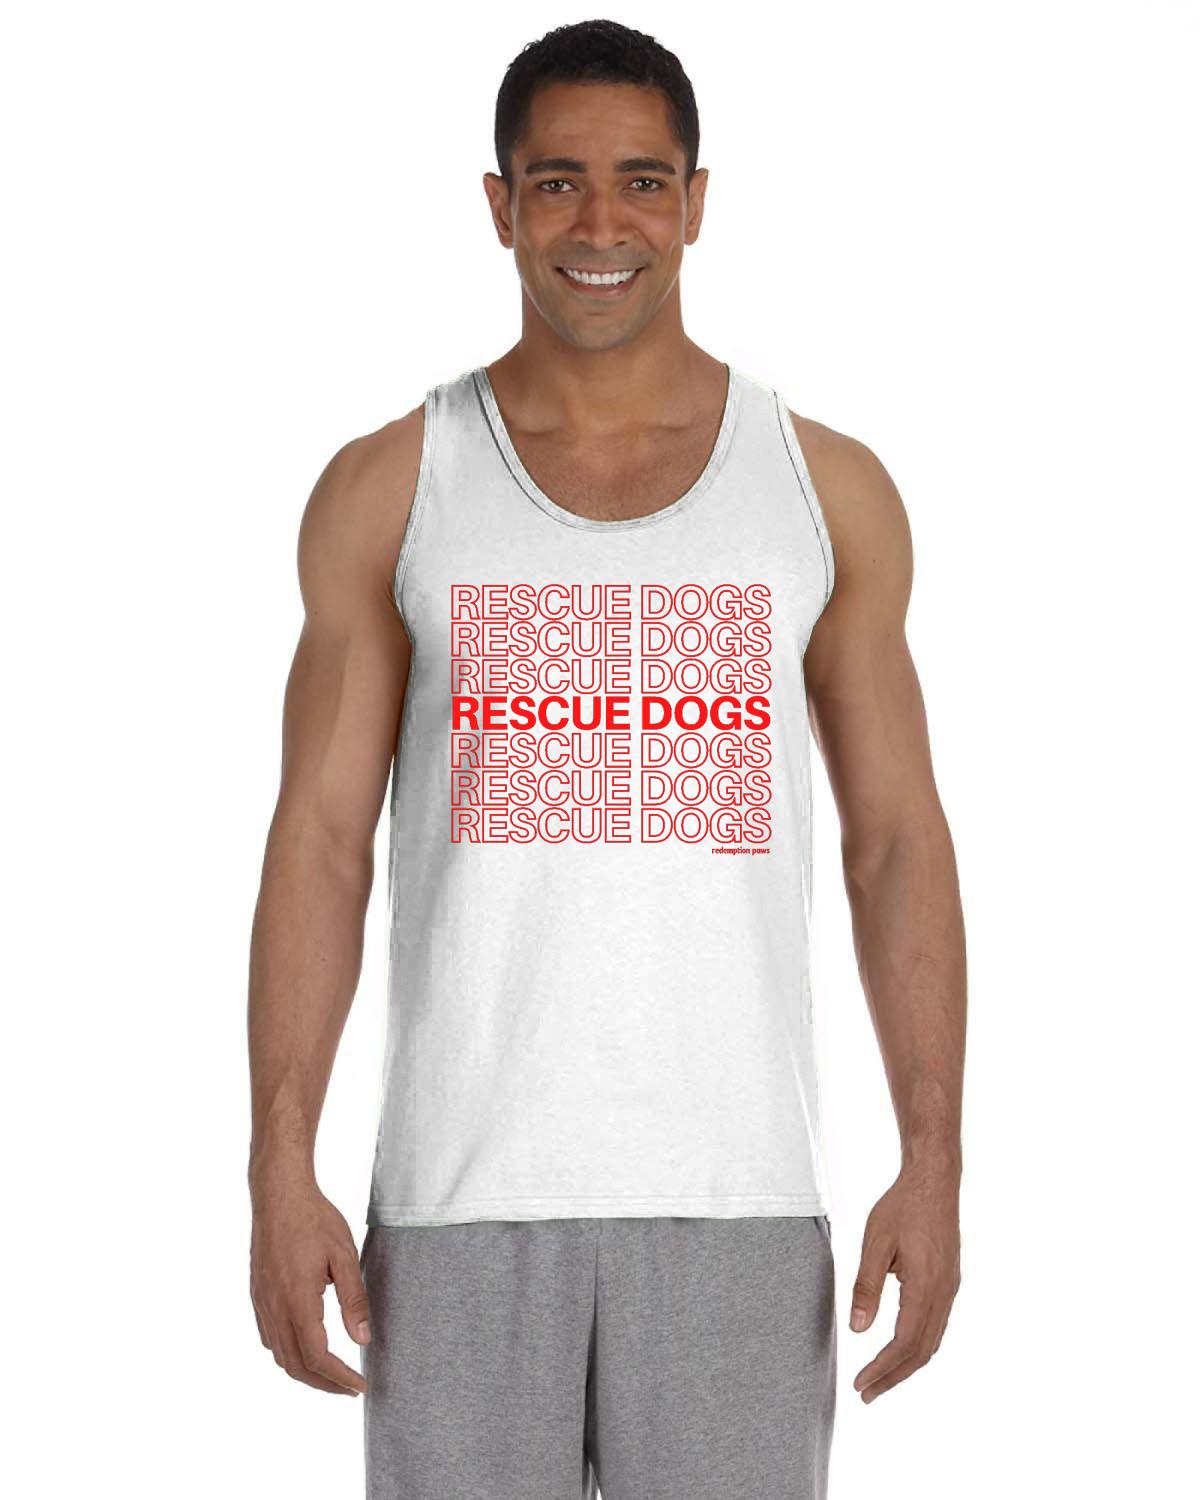 Rescue Dogs Thank You Tank Top